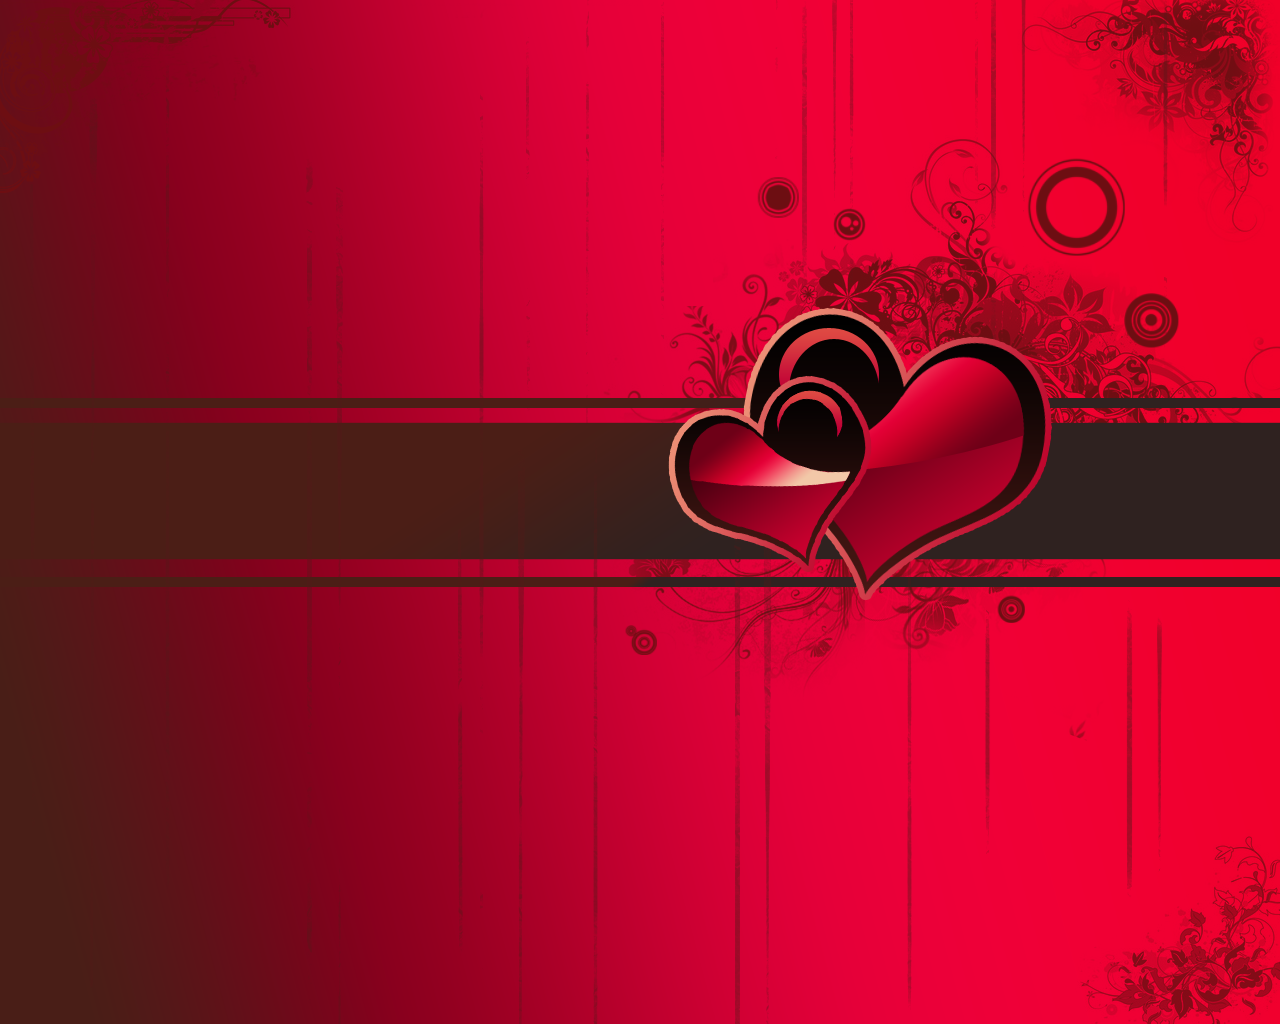 http://www.moyeamedia.com/blog/wp-content/uploads/2012/02/valentines-day-wallpapers-5.jpg